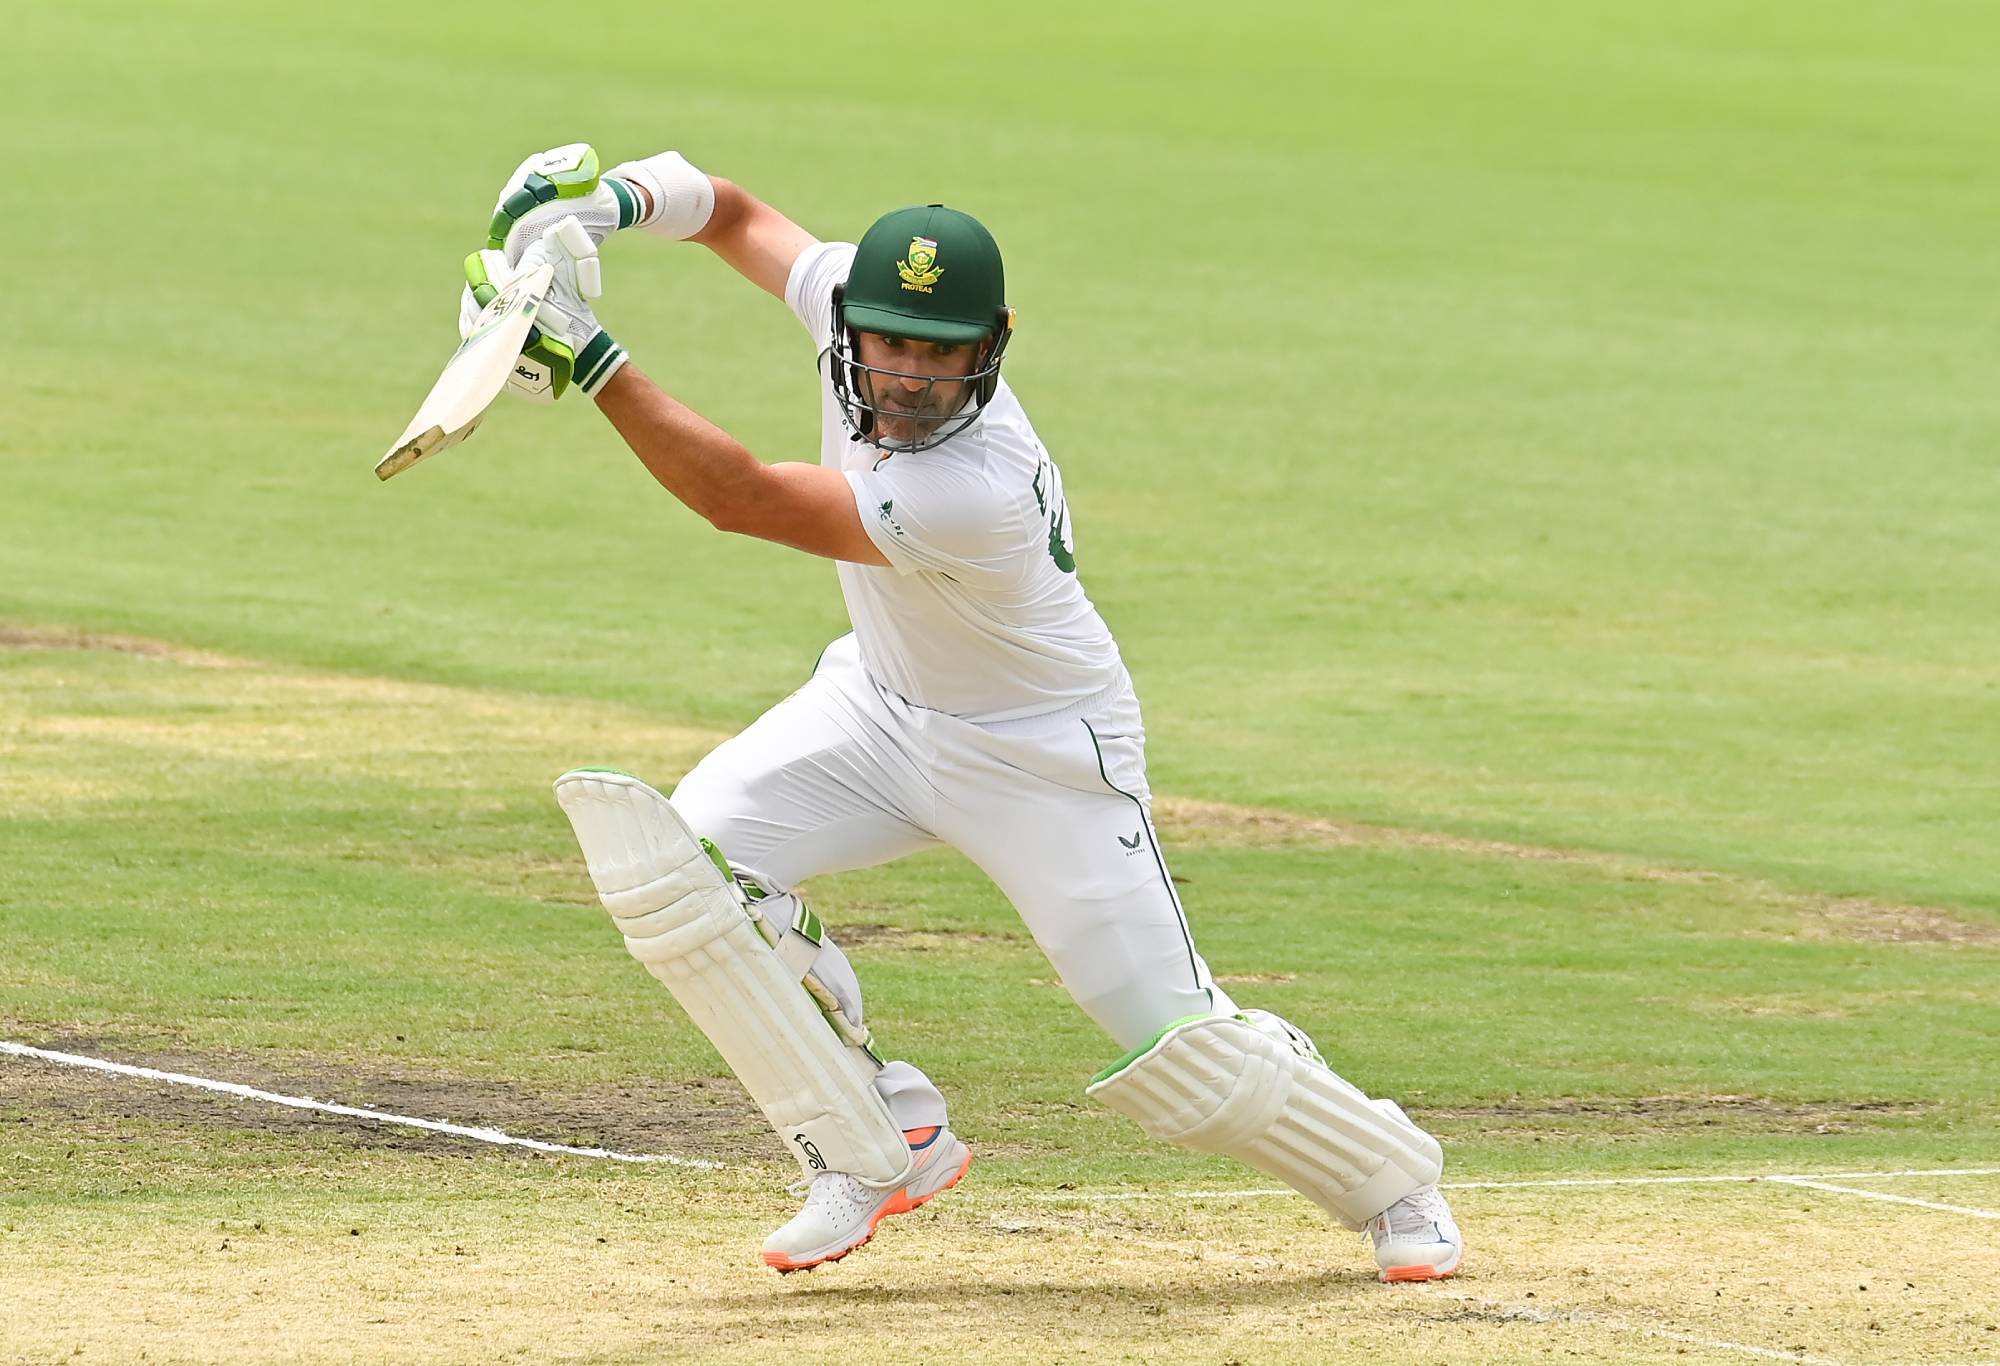 BRISBANE, AUSTRALIA - DECEMBER 09: Dean Elgar of South Africa bats during day one of the Tour Match between Australia A and South Africa at Allan Border Field on December 09, 2022 in Brisbane, Australia. (Photo by Albert Perez/Getty Images)